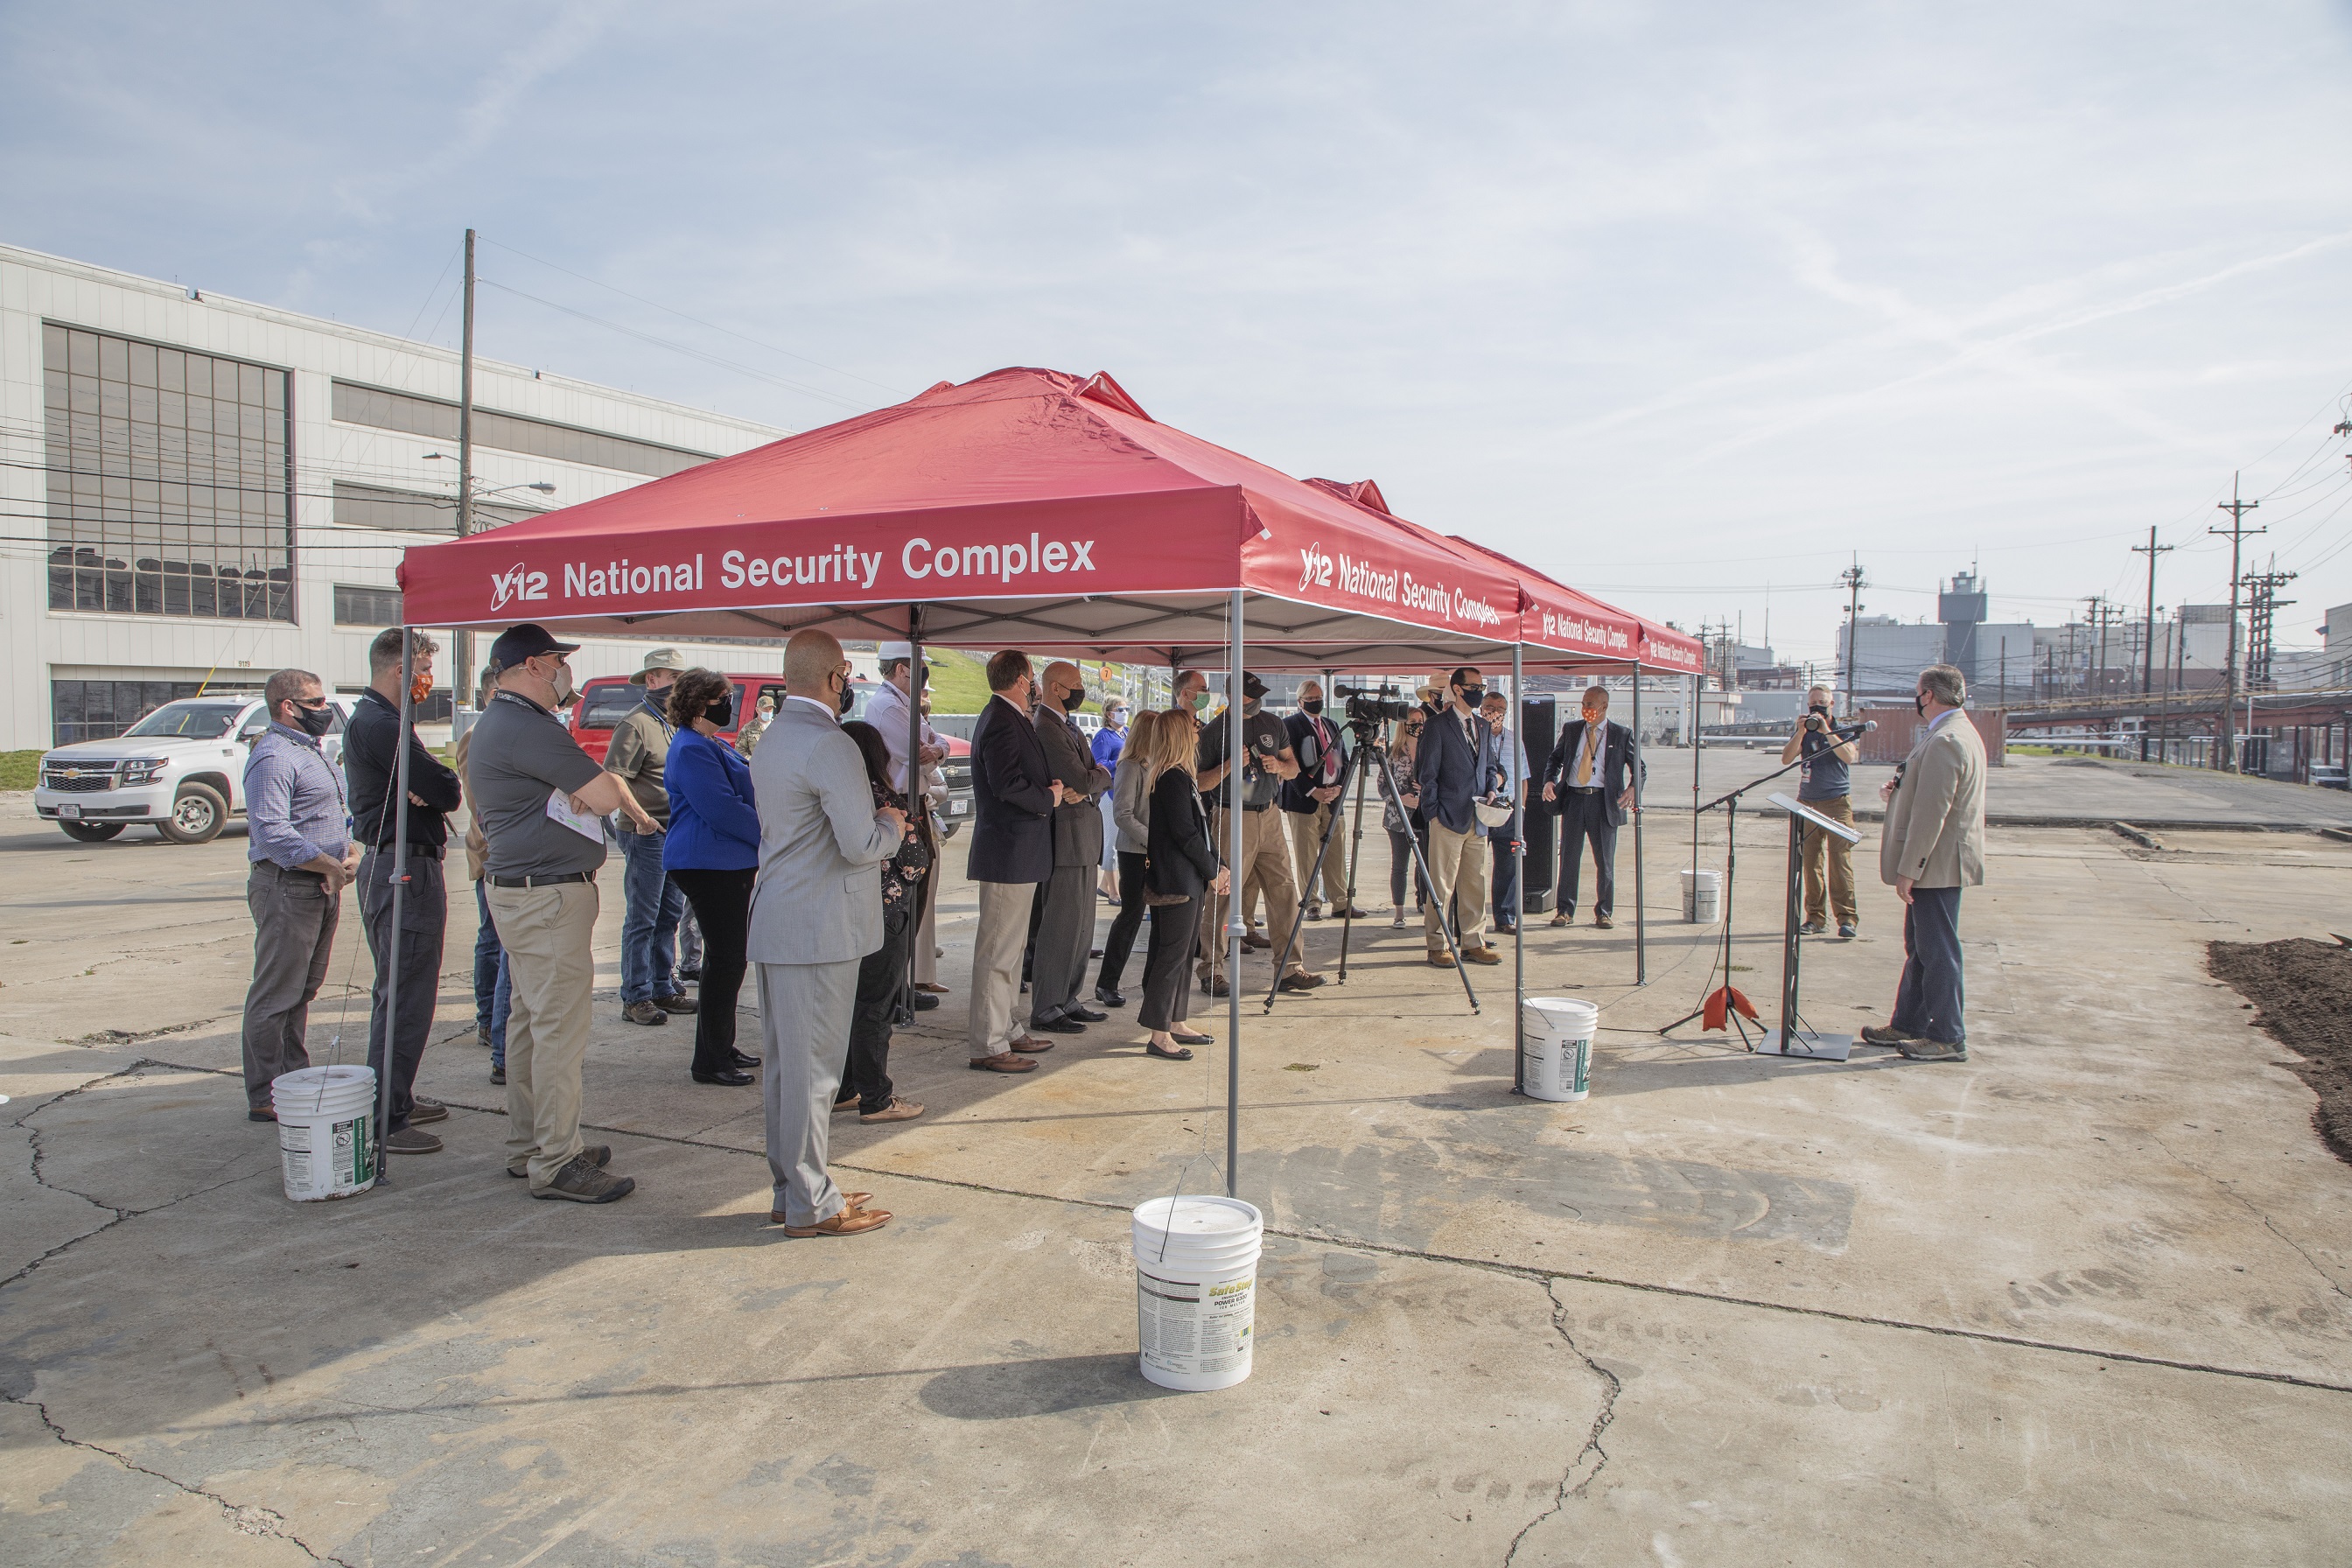 Officials participate in a groundbreaking ceremony for the West End Protected Area Reduction project (WEPAR) at Y-12 National Security Complex